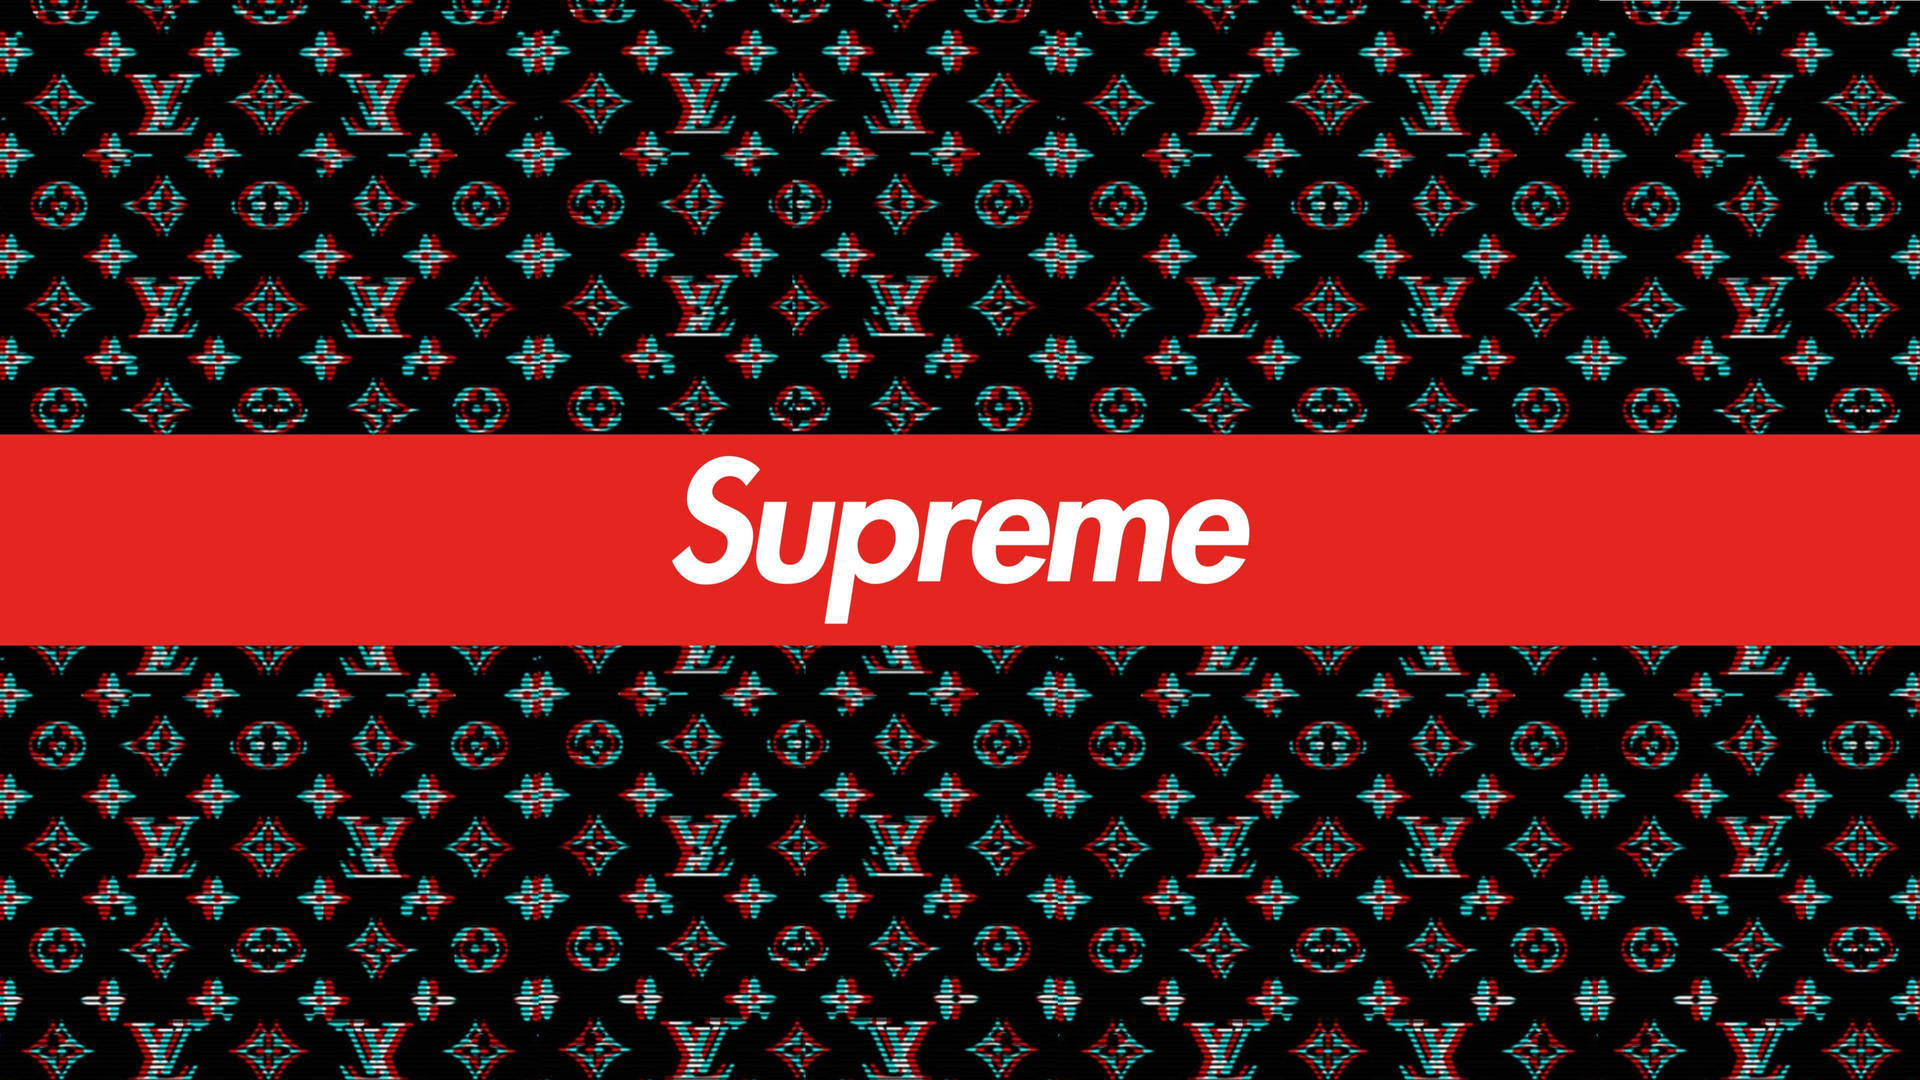 Supreme Quality and Style from Louis Vuitton Wallpaper